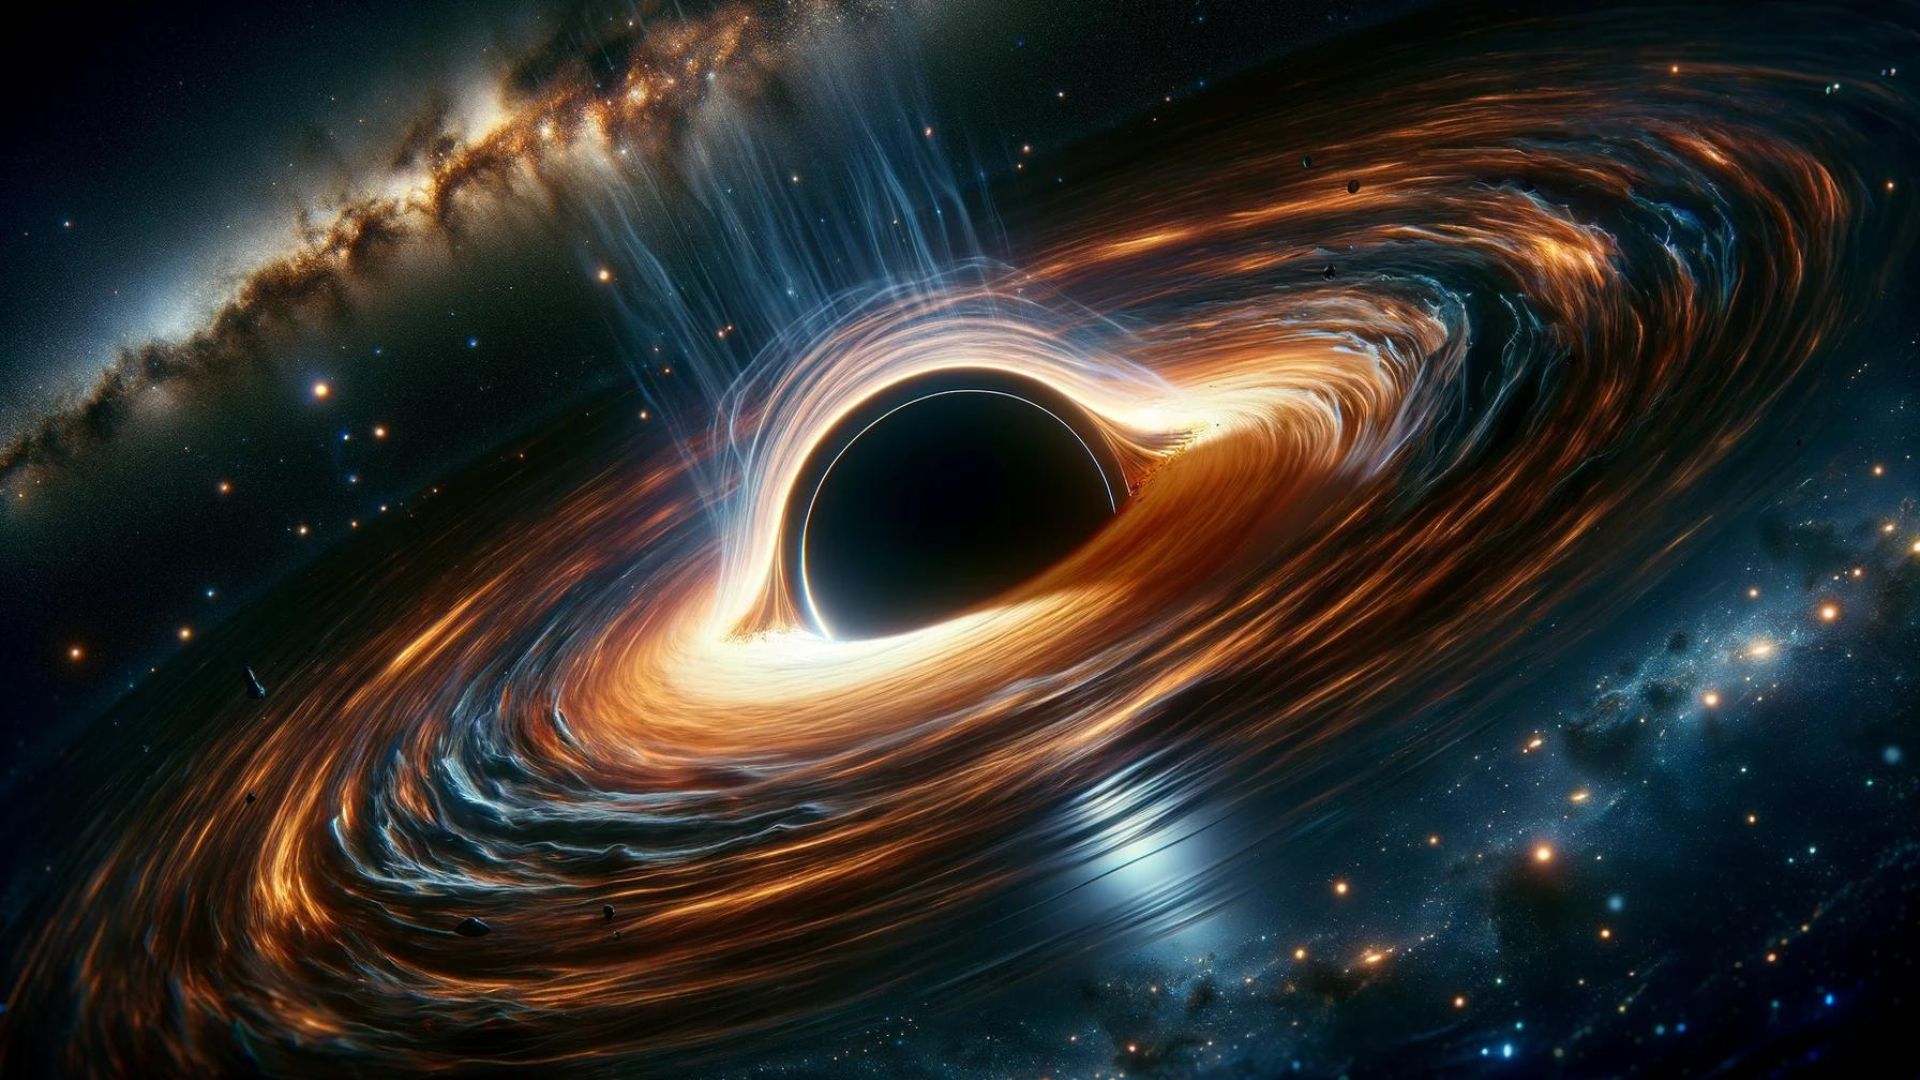 What Makes a Black Hole